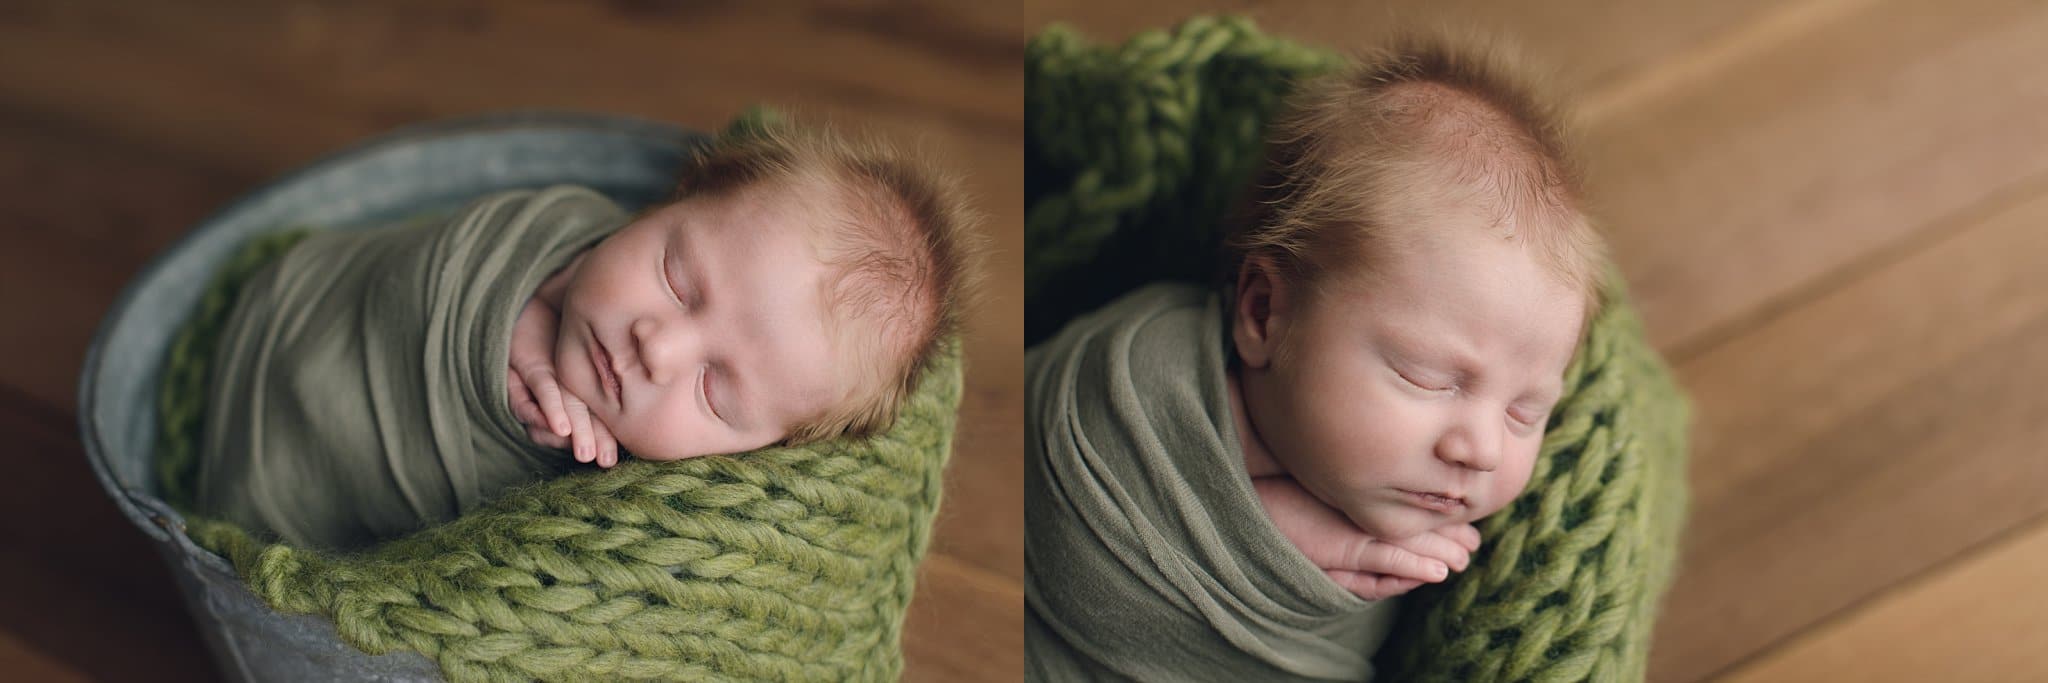 St Johns County Newborn Photographer baby boy with fuzzy hair swaddled in green